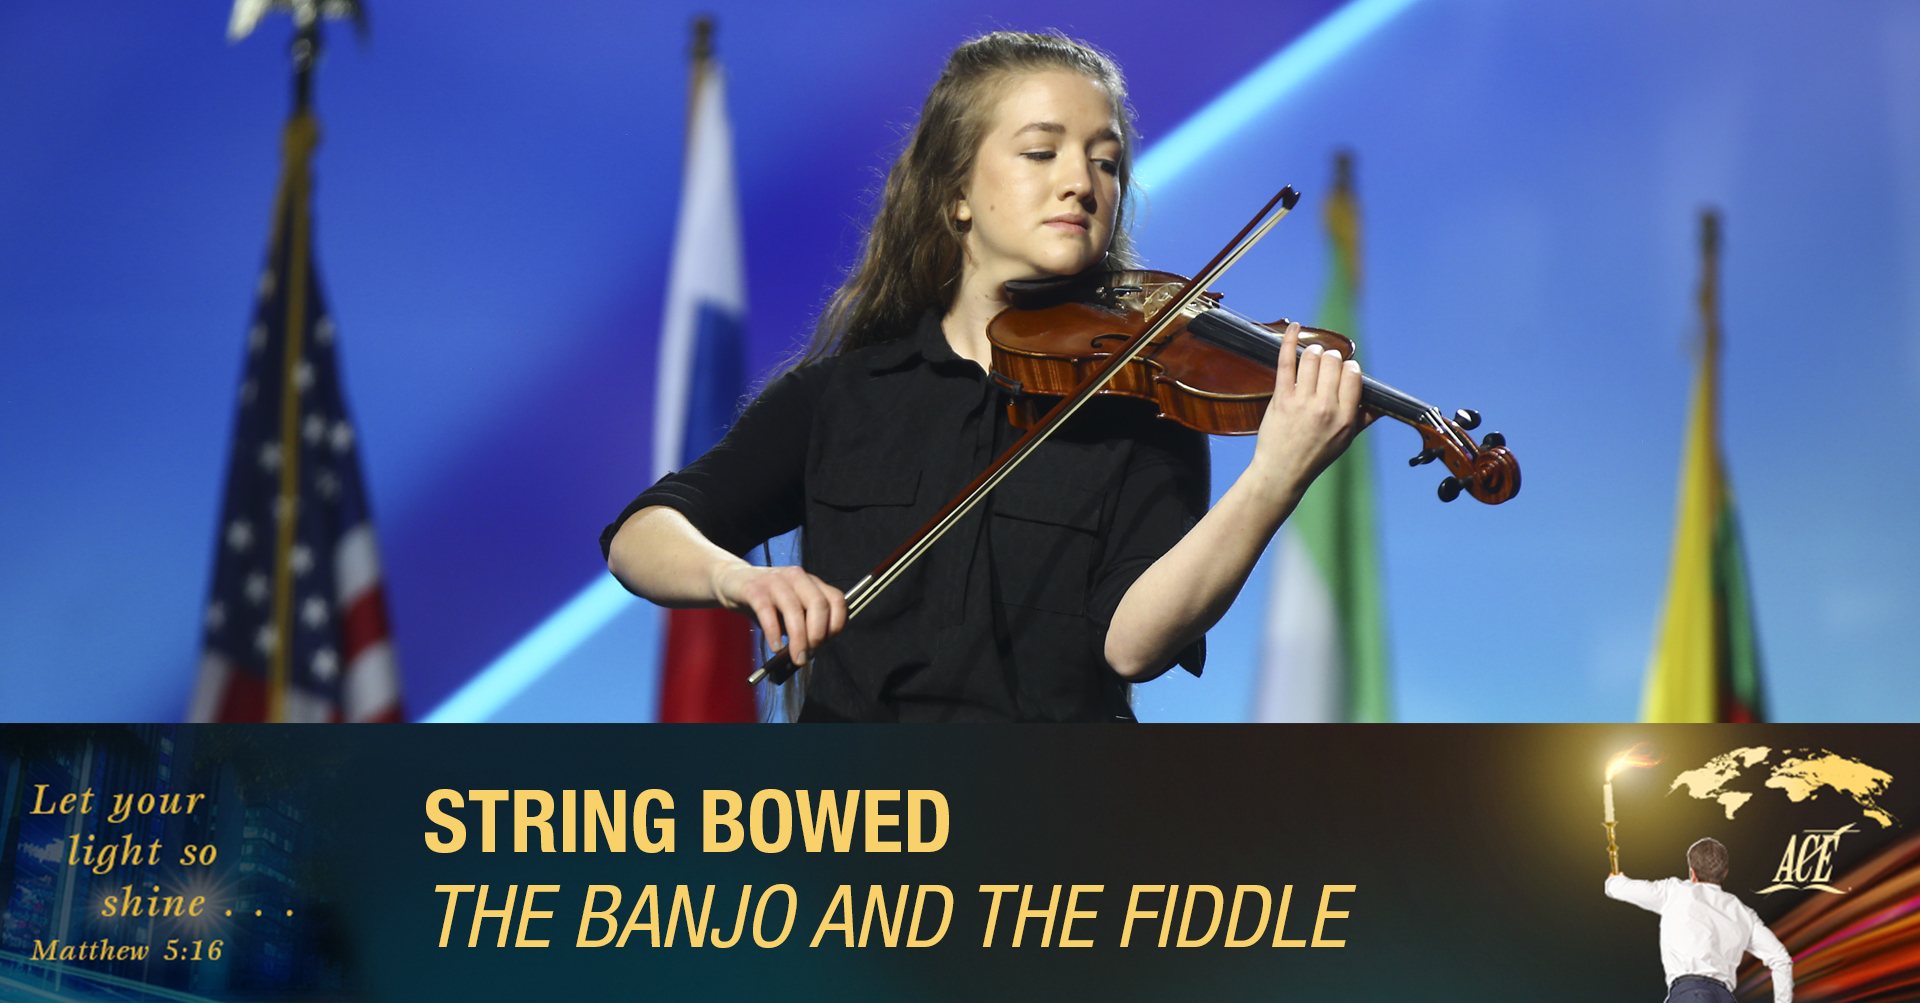 String Bowed, "The Banjo And The Fiddle"